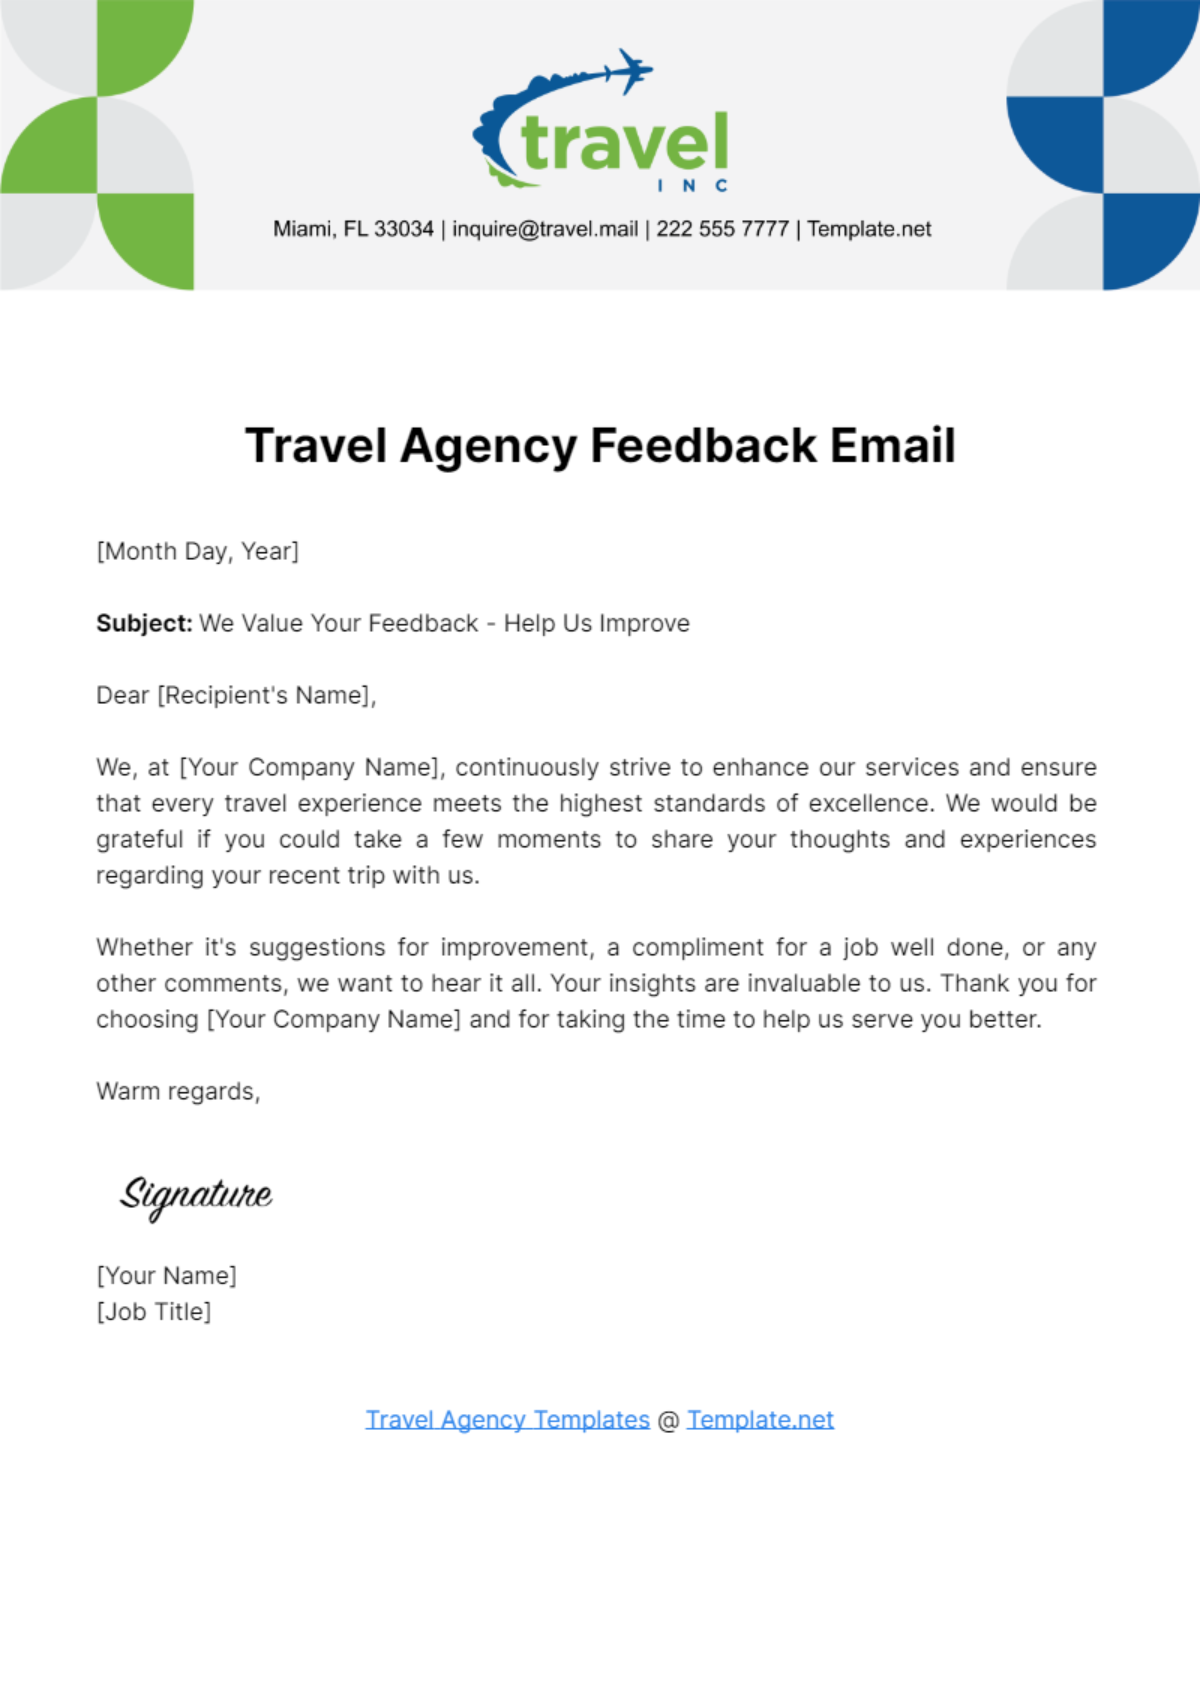 Travel Agency Feedback Email Template